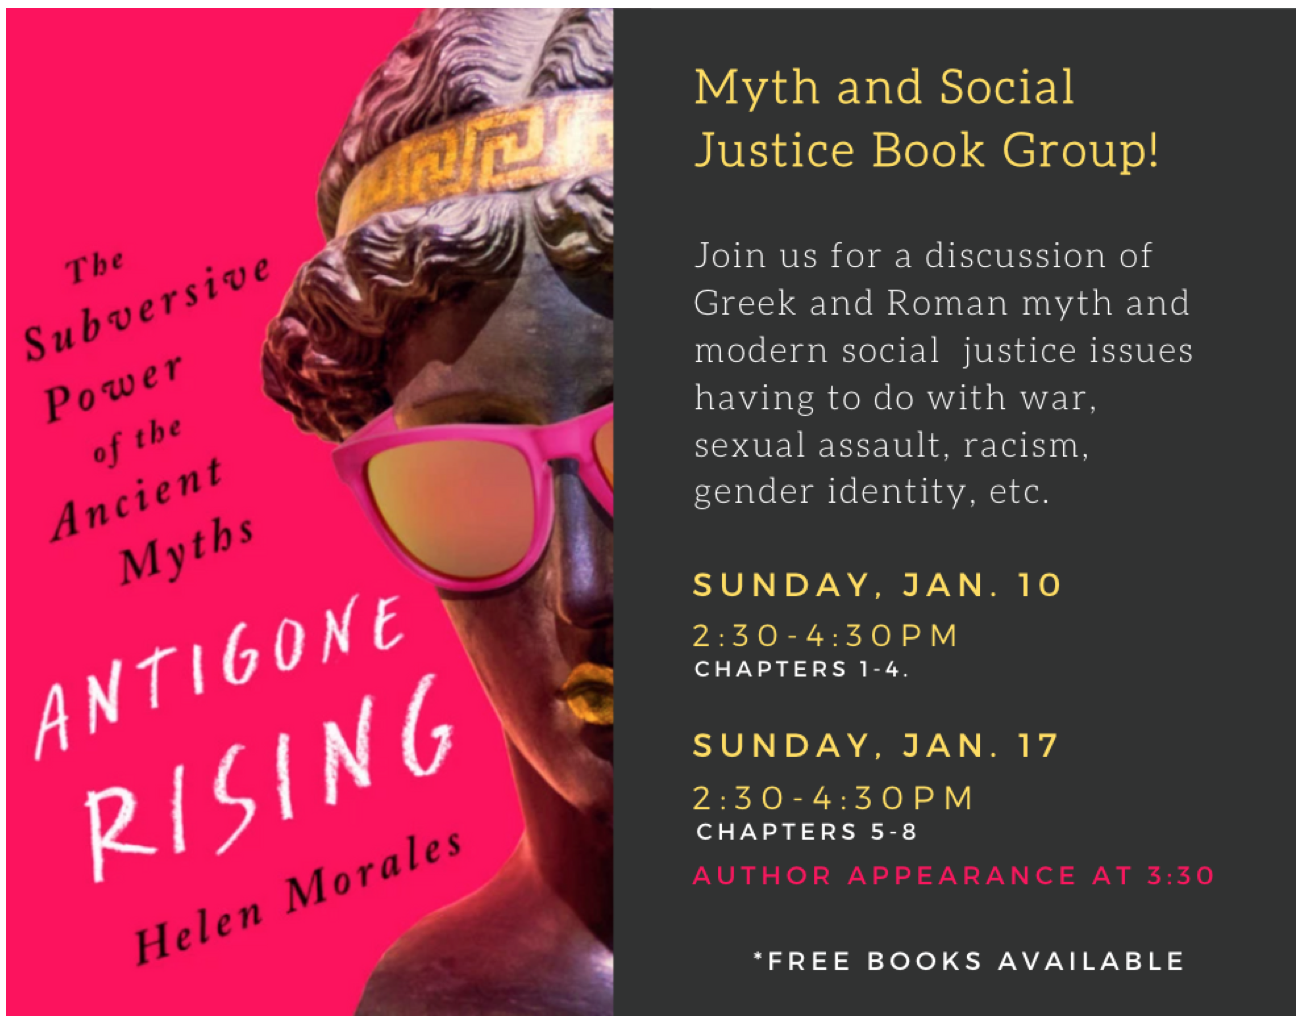 Figure 3. The flyer for the Myth and Social Justice group led by Yurie Hong.